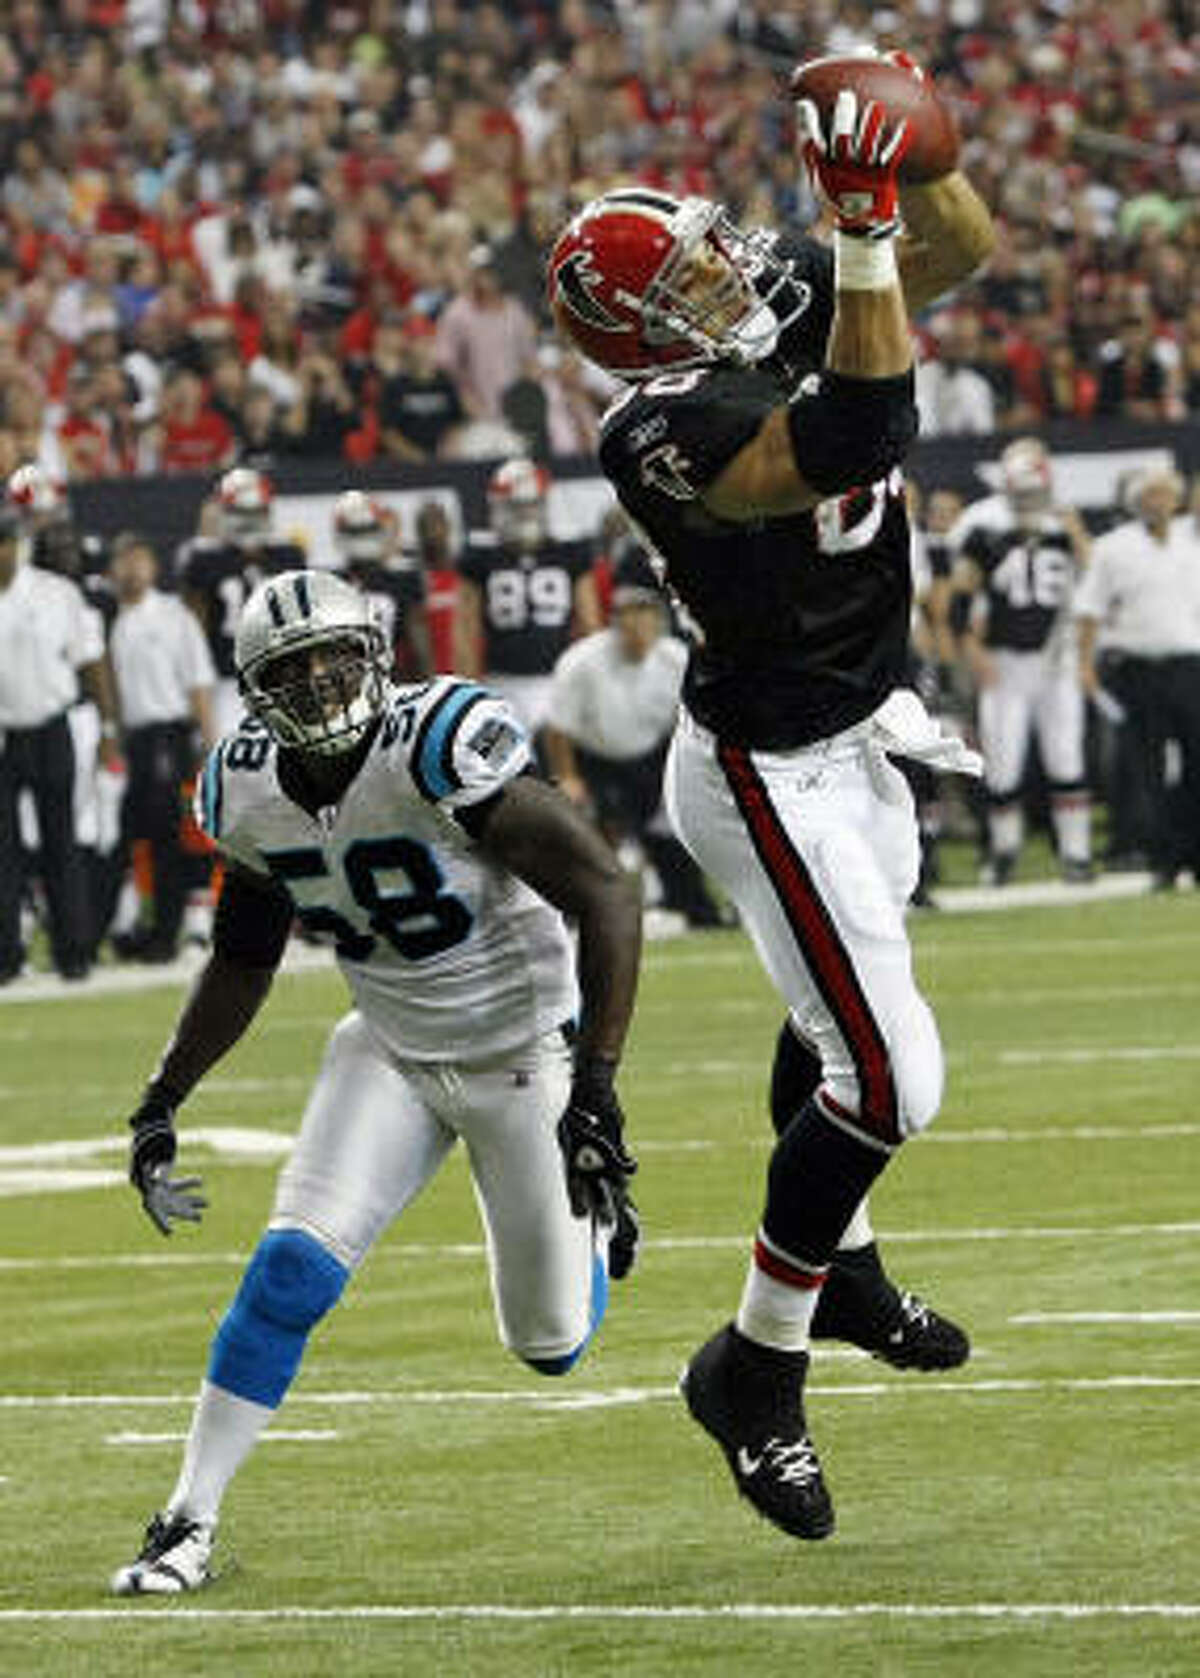 Falcons 28, Panthers 20 Falcons tight end Tony Gonzalez beats the coverage of Panthers linebacker Thomas Davis for a touchdown reception during the first quarter of Sunday's game.